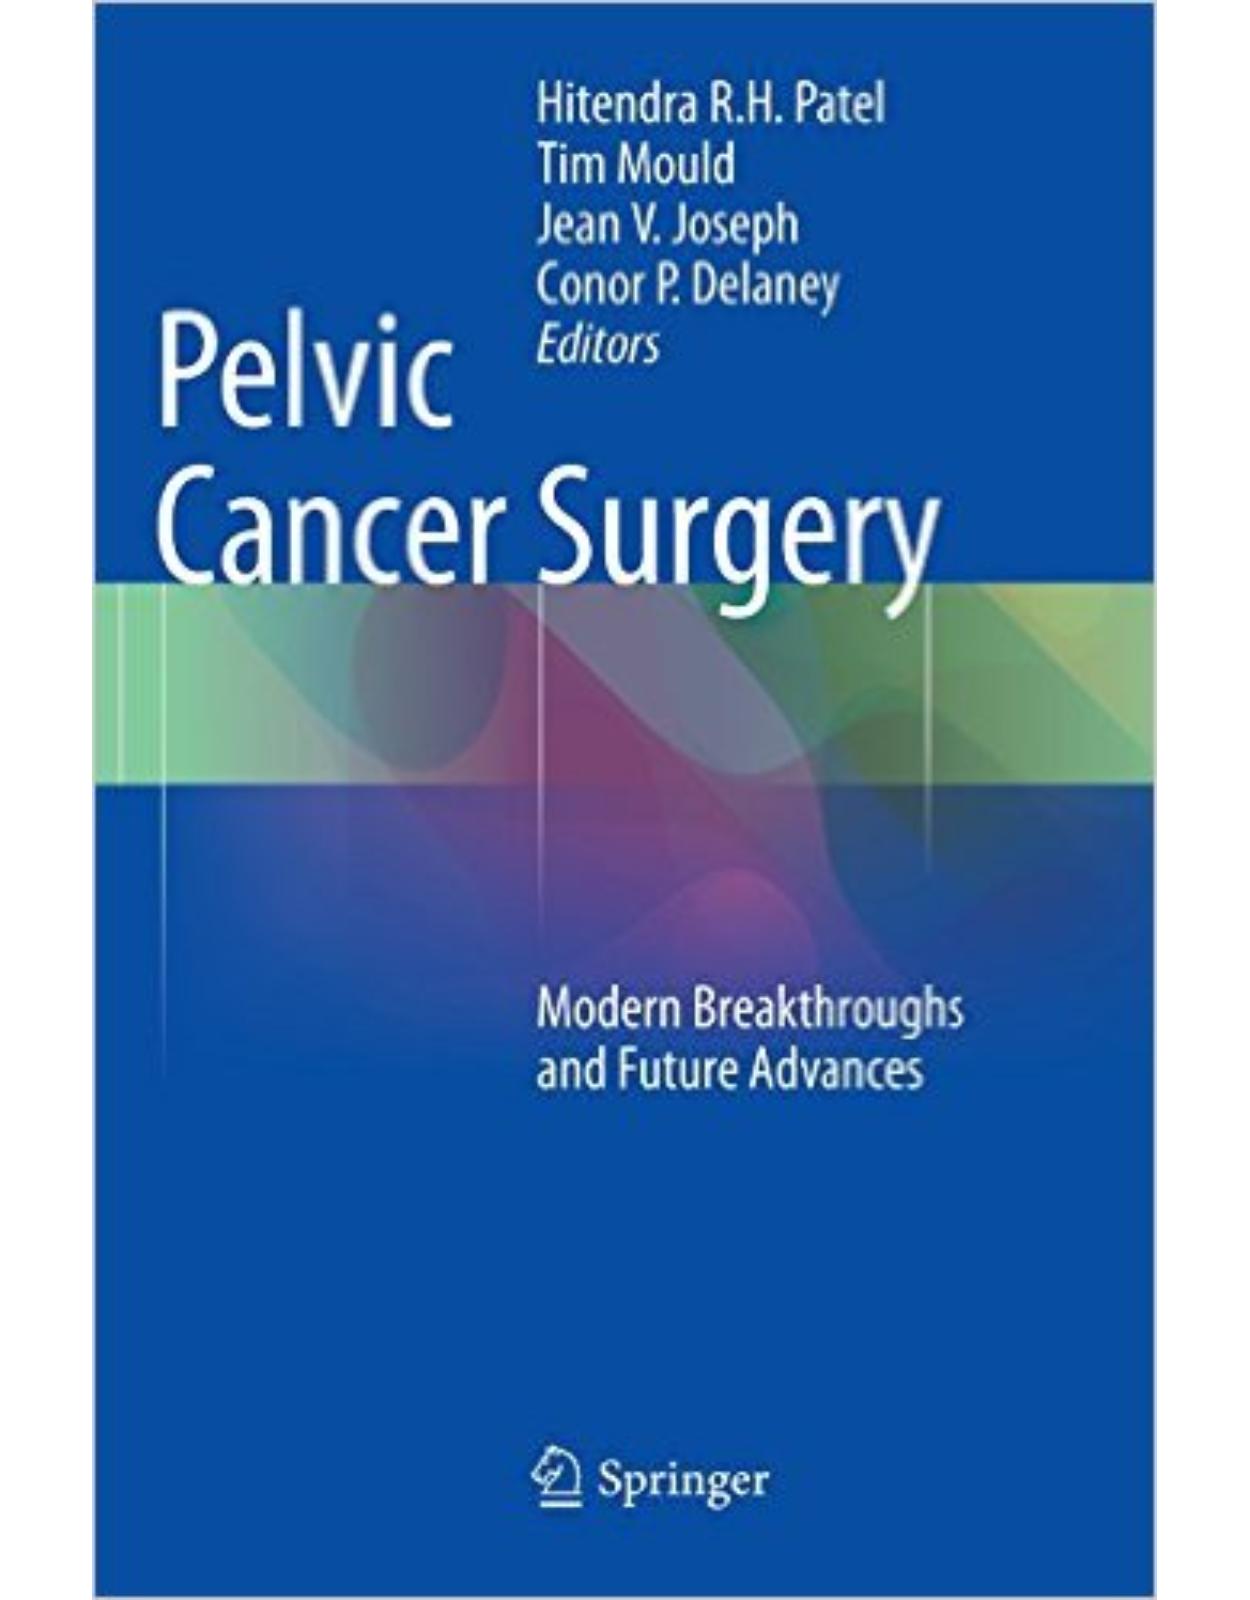 Pelvic Cancer Surgery: Modern Breakthroughs and Future Advances 2015th Edition